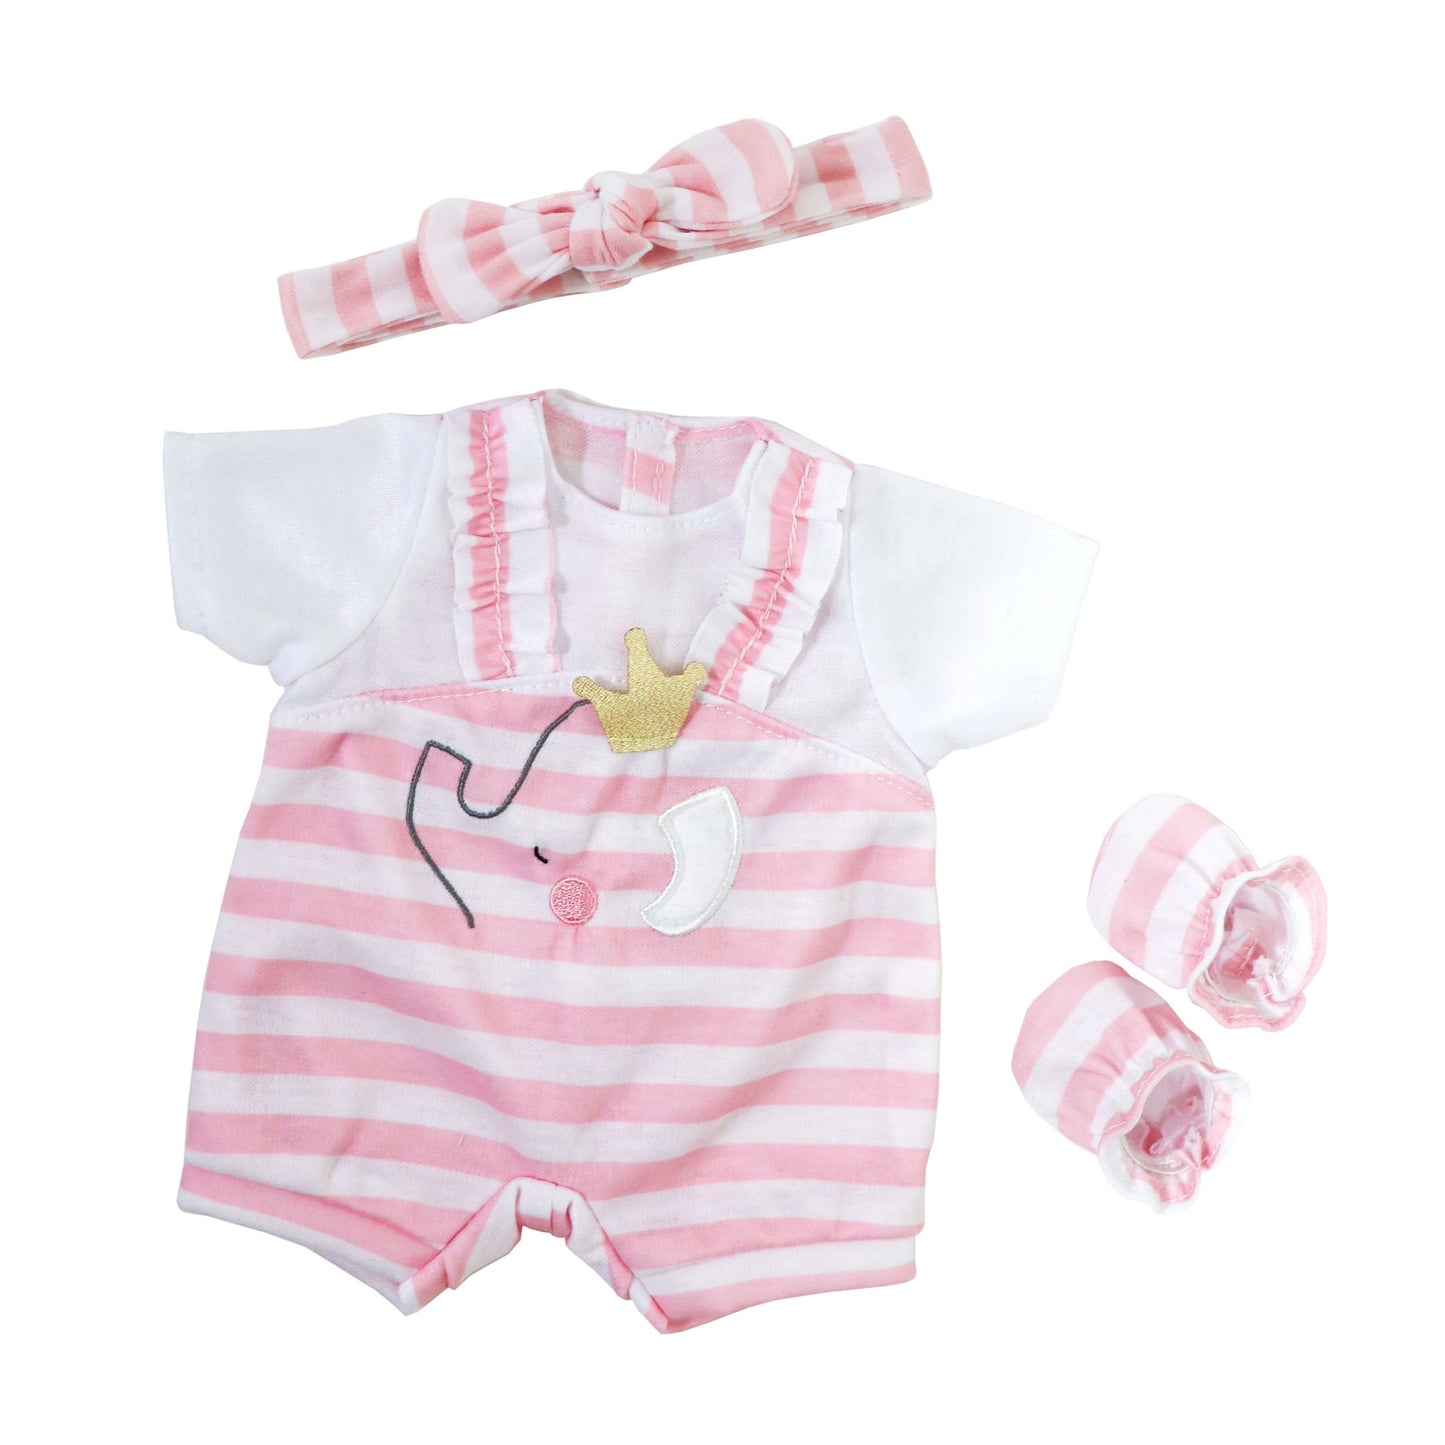 JC Toys Berenguer Boutique Baby Doll Outfit  Pink Stripes and White Overall Shorts Includes Headband and Booties